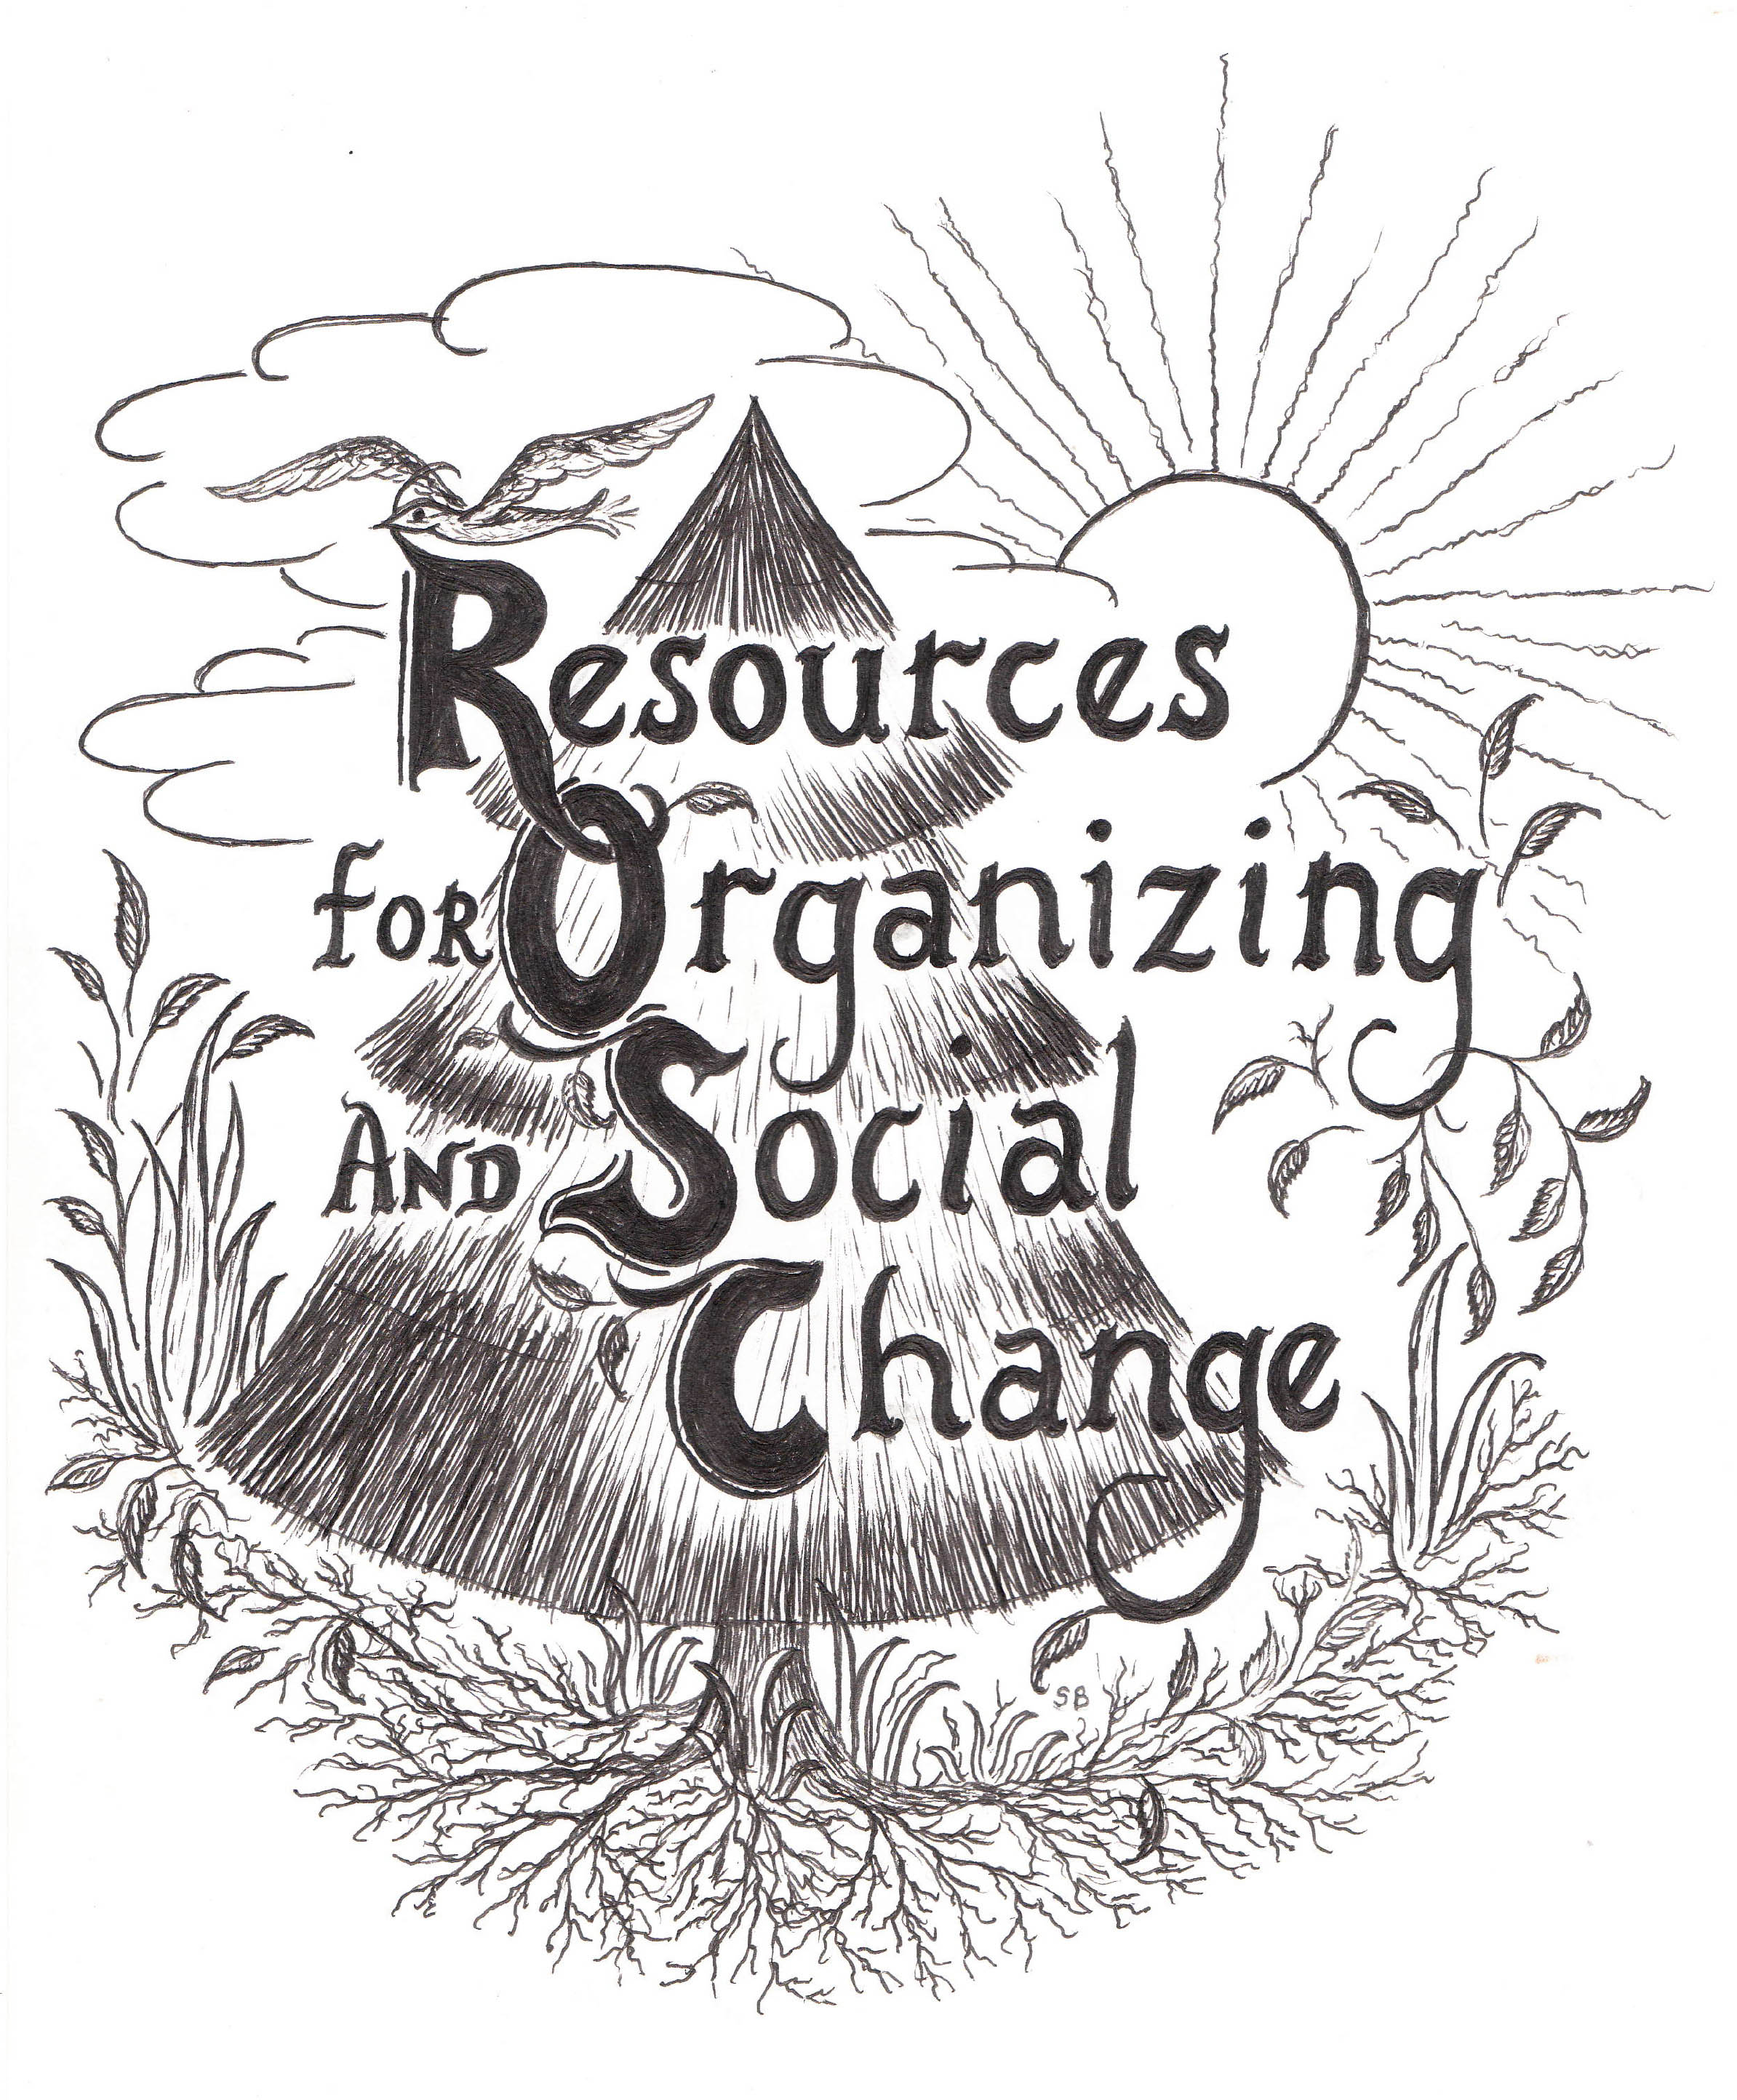 Resources for Organizing and Social Change logo